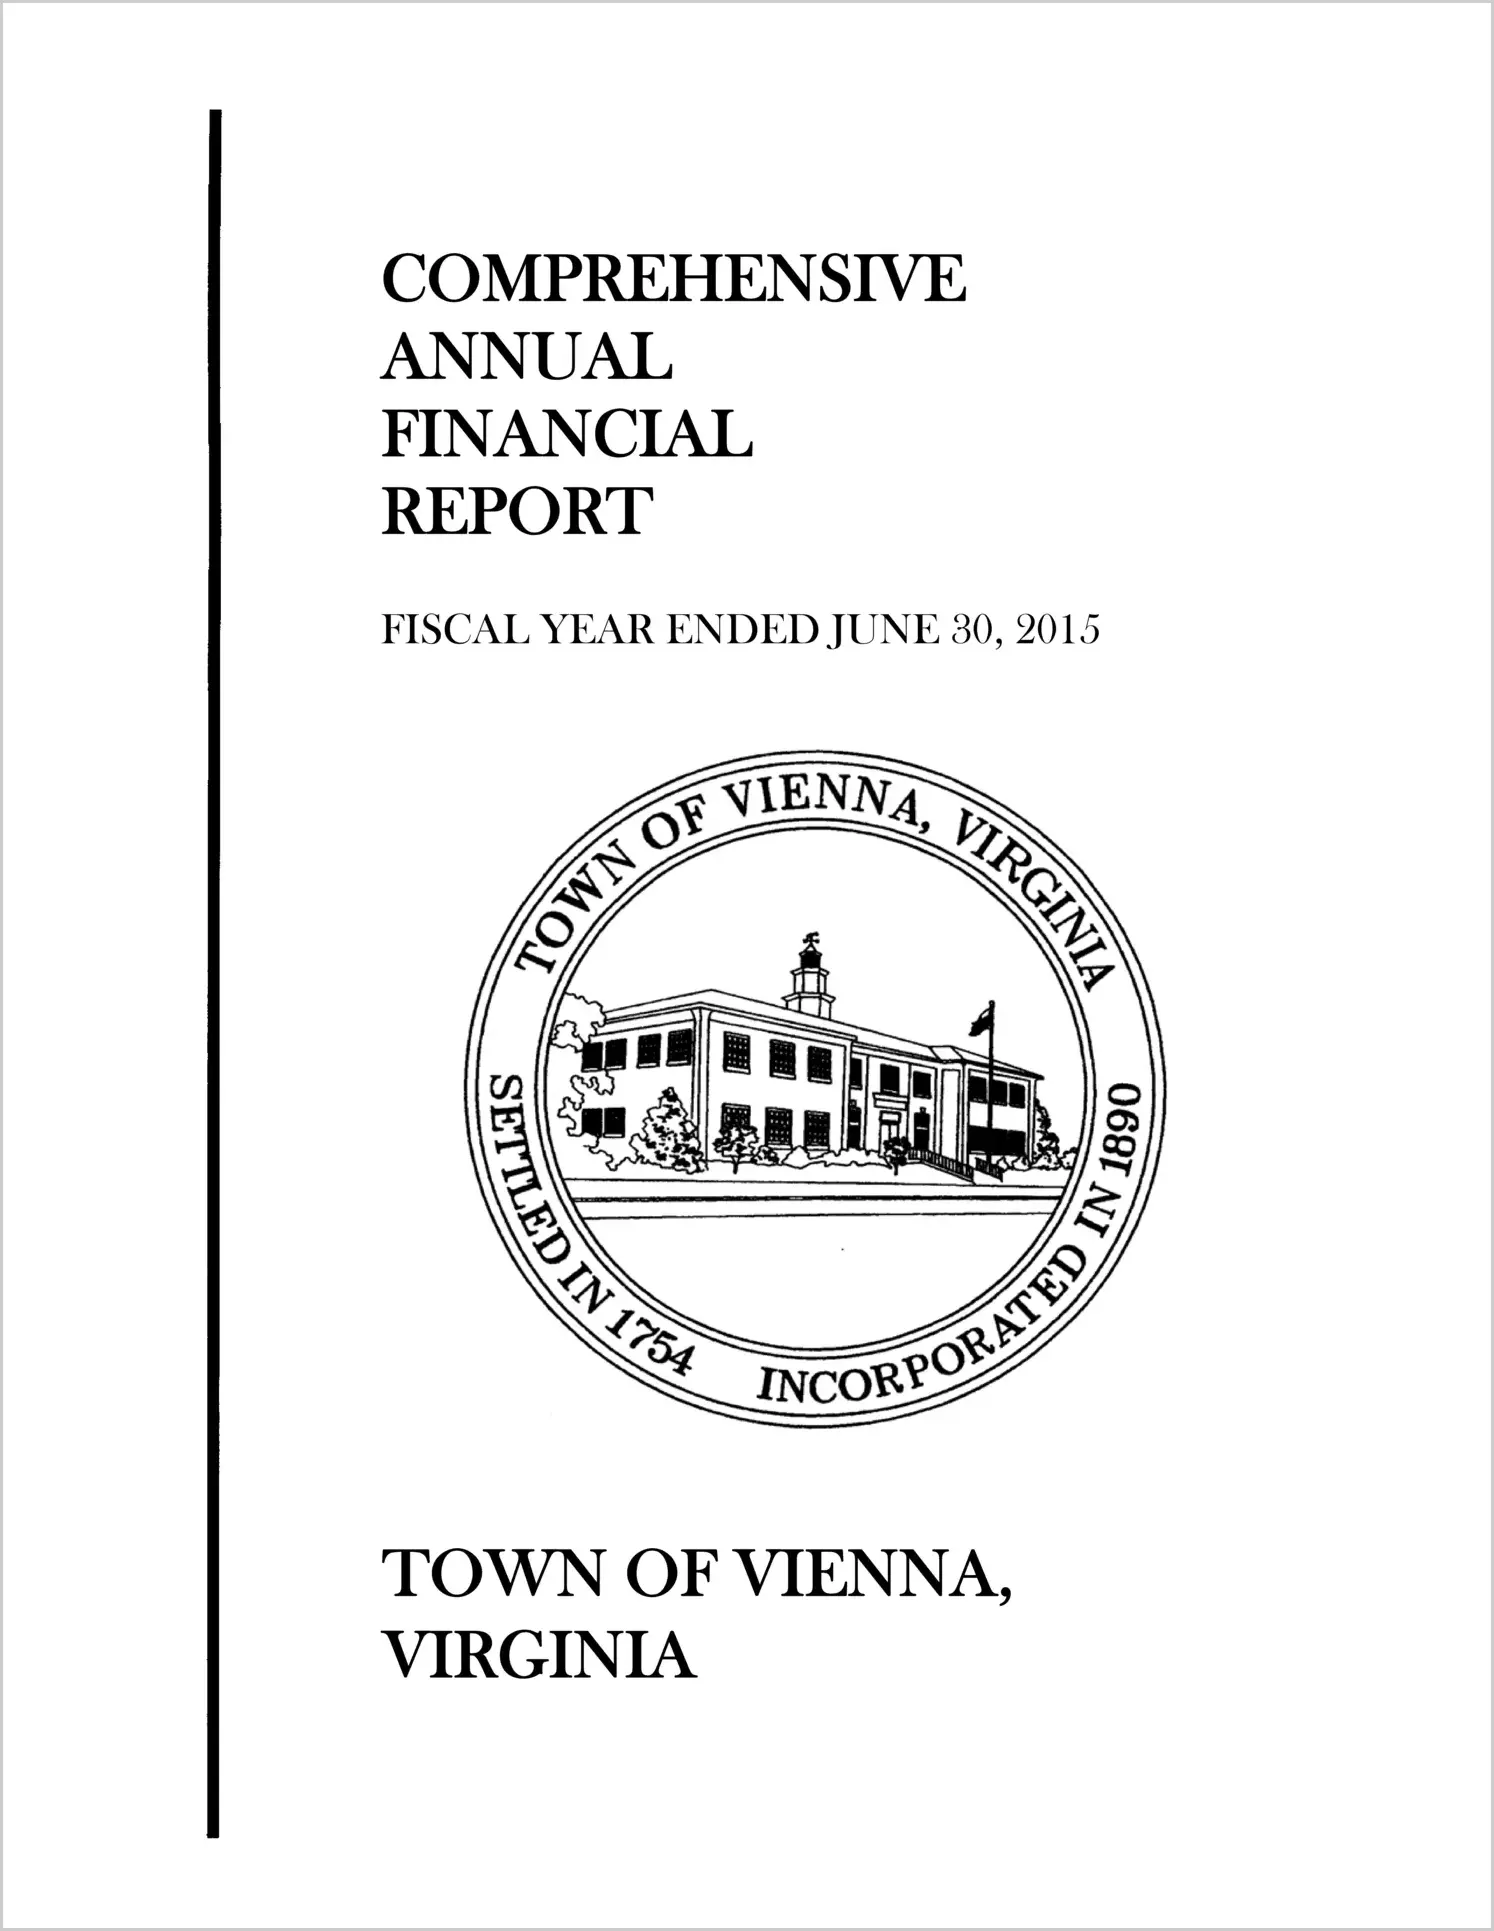 2015 Annual Financial Report for Town of Vienna